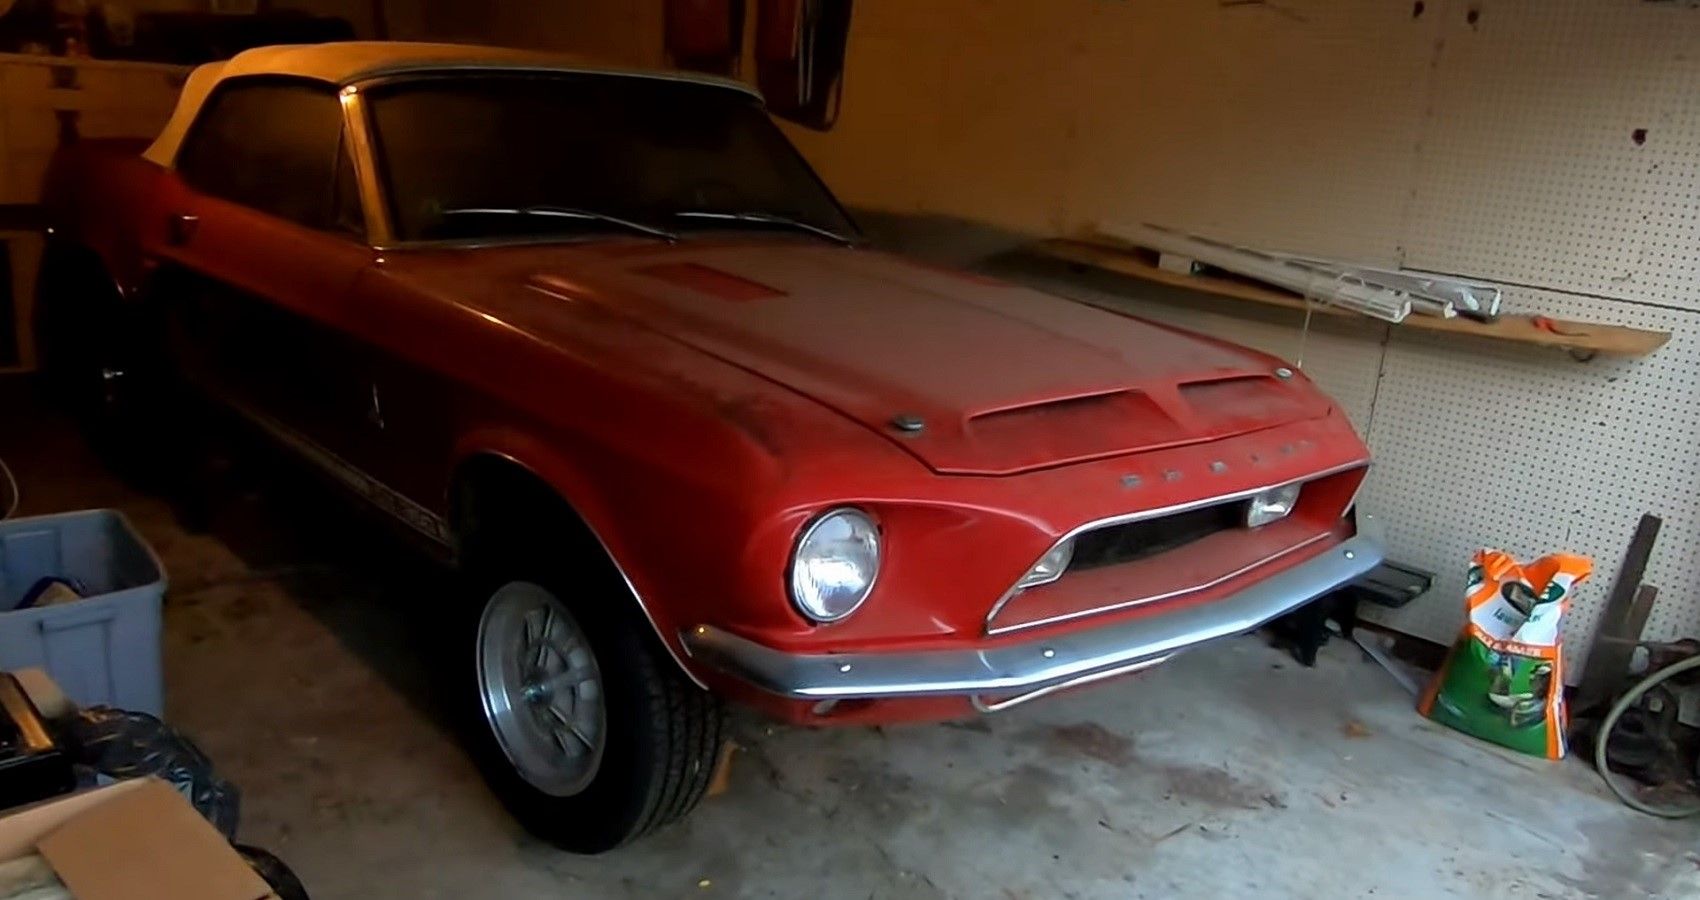 1968 Ford Shelby Mustang GT350 Convertible, red, in garage